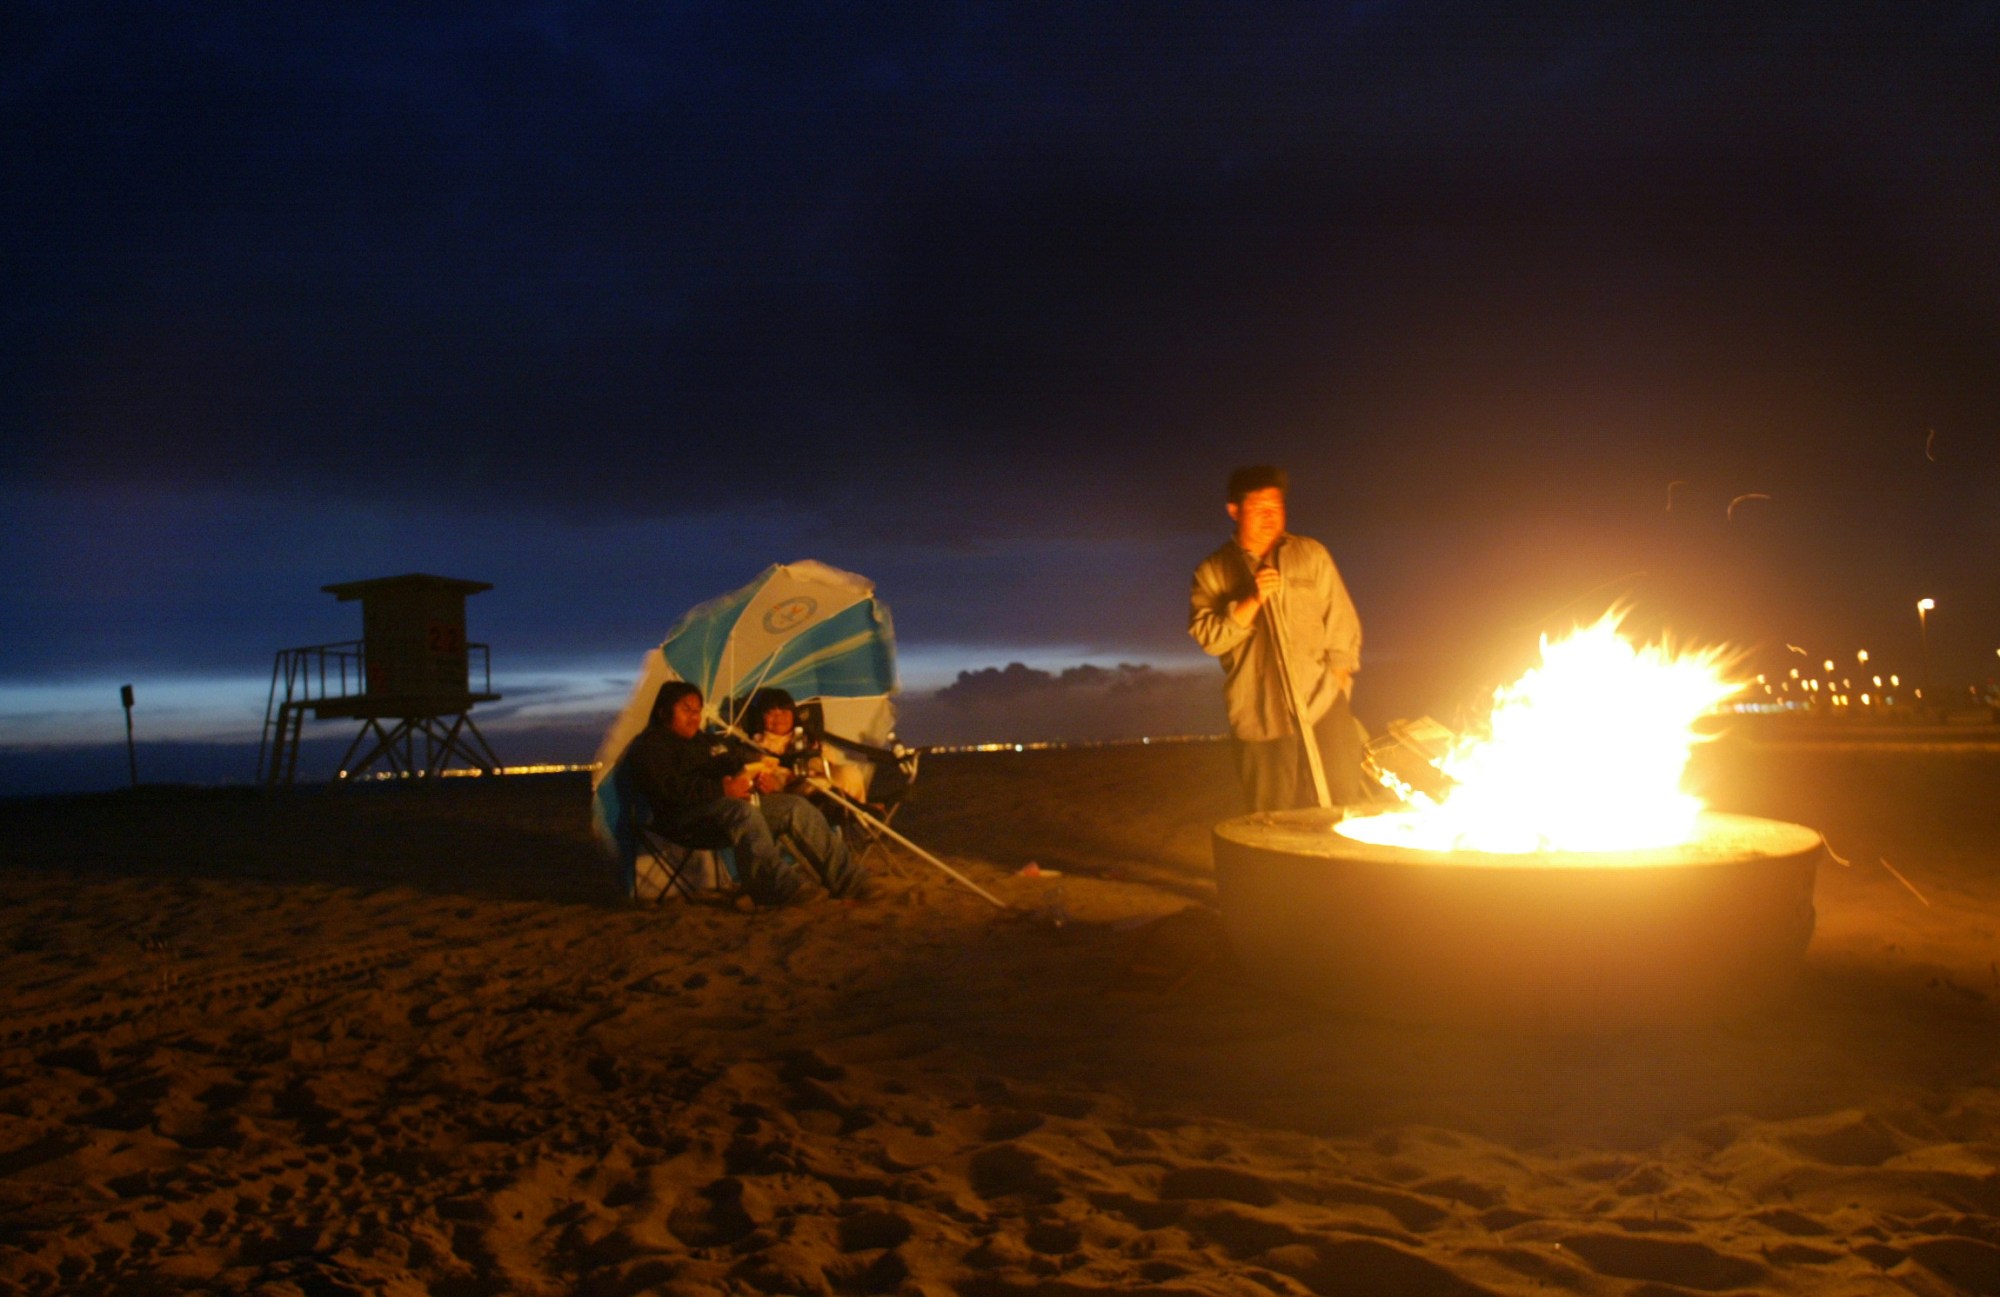 Fire rings can be found along the Huntington Beach shore, including at Bolsa State Beach, seen here. (File photo by Kevin Sullivan/Orange County Register/SCNG)